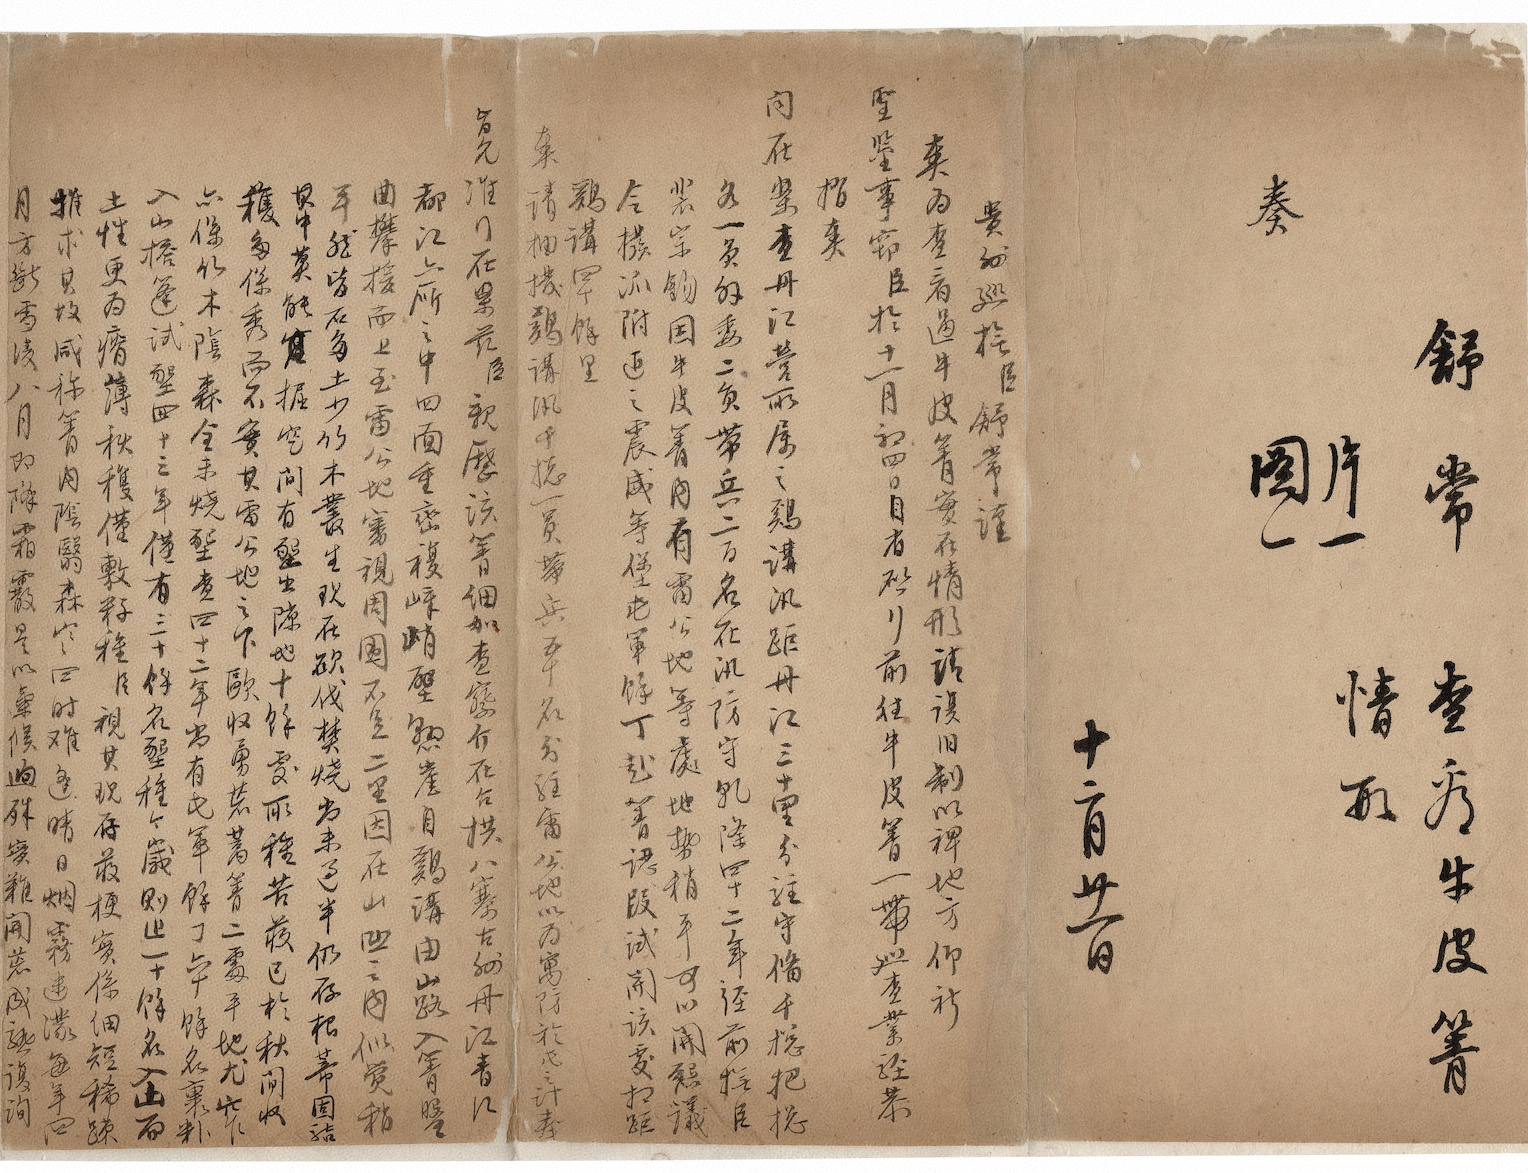 Palace memorial offering a status report of the Niupijing area